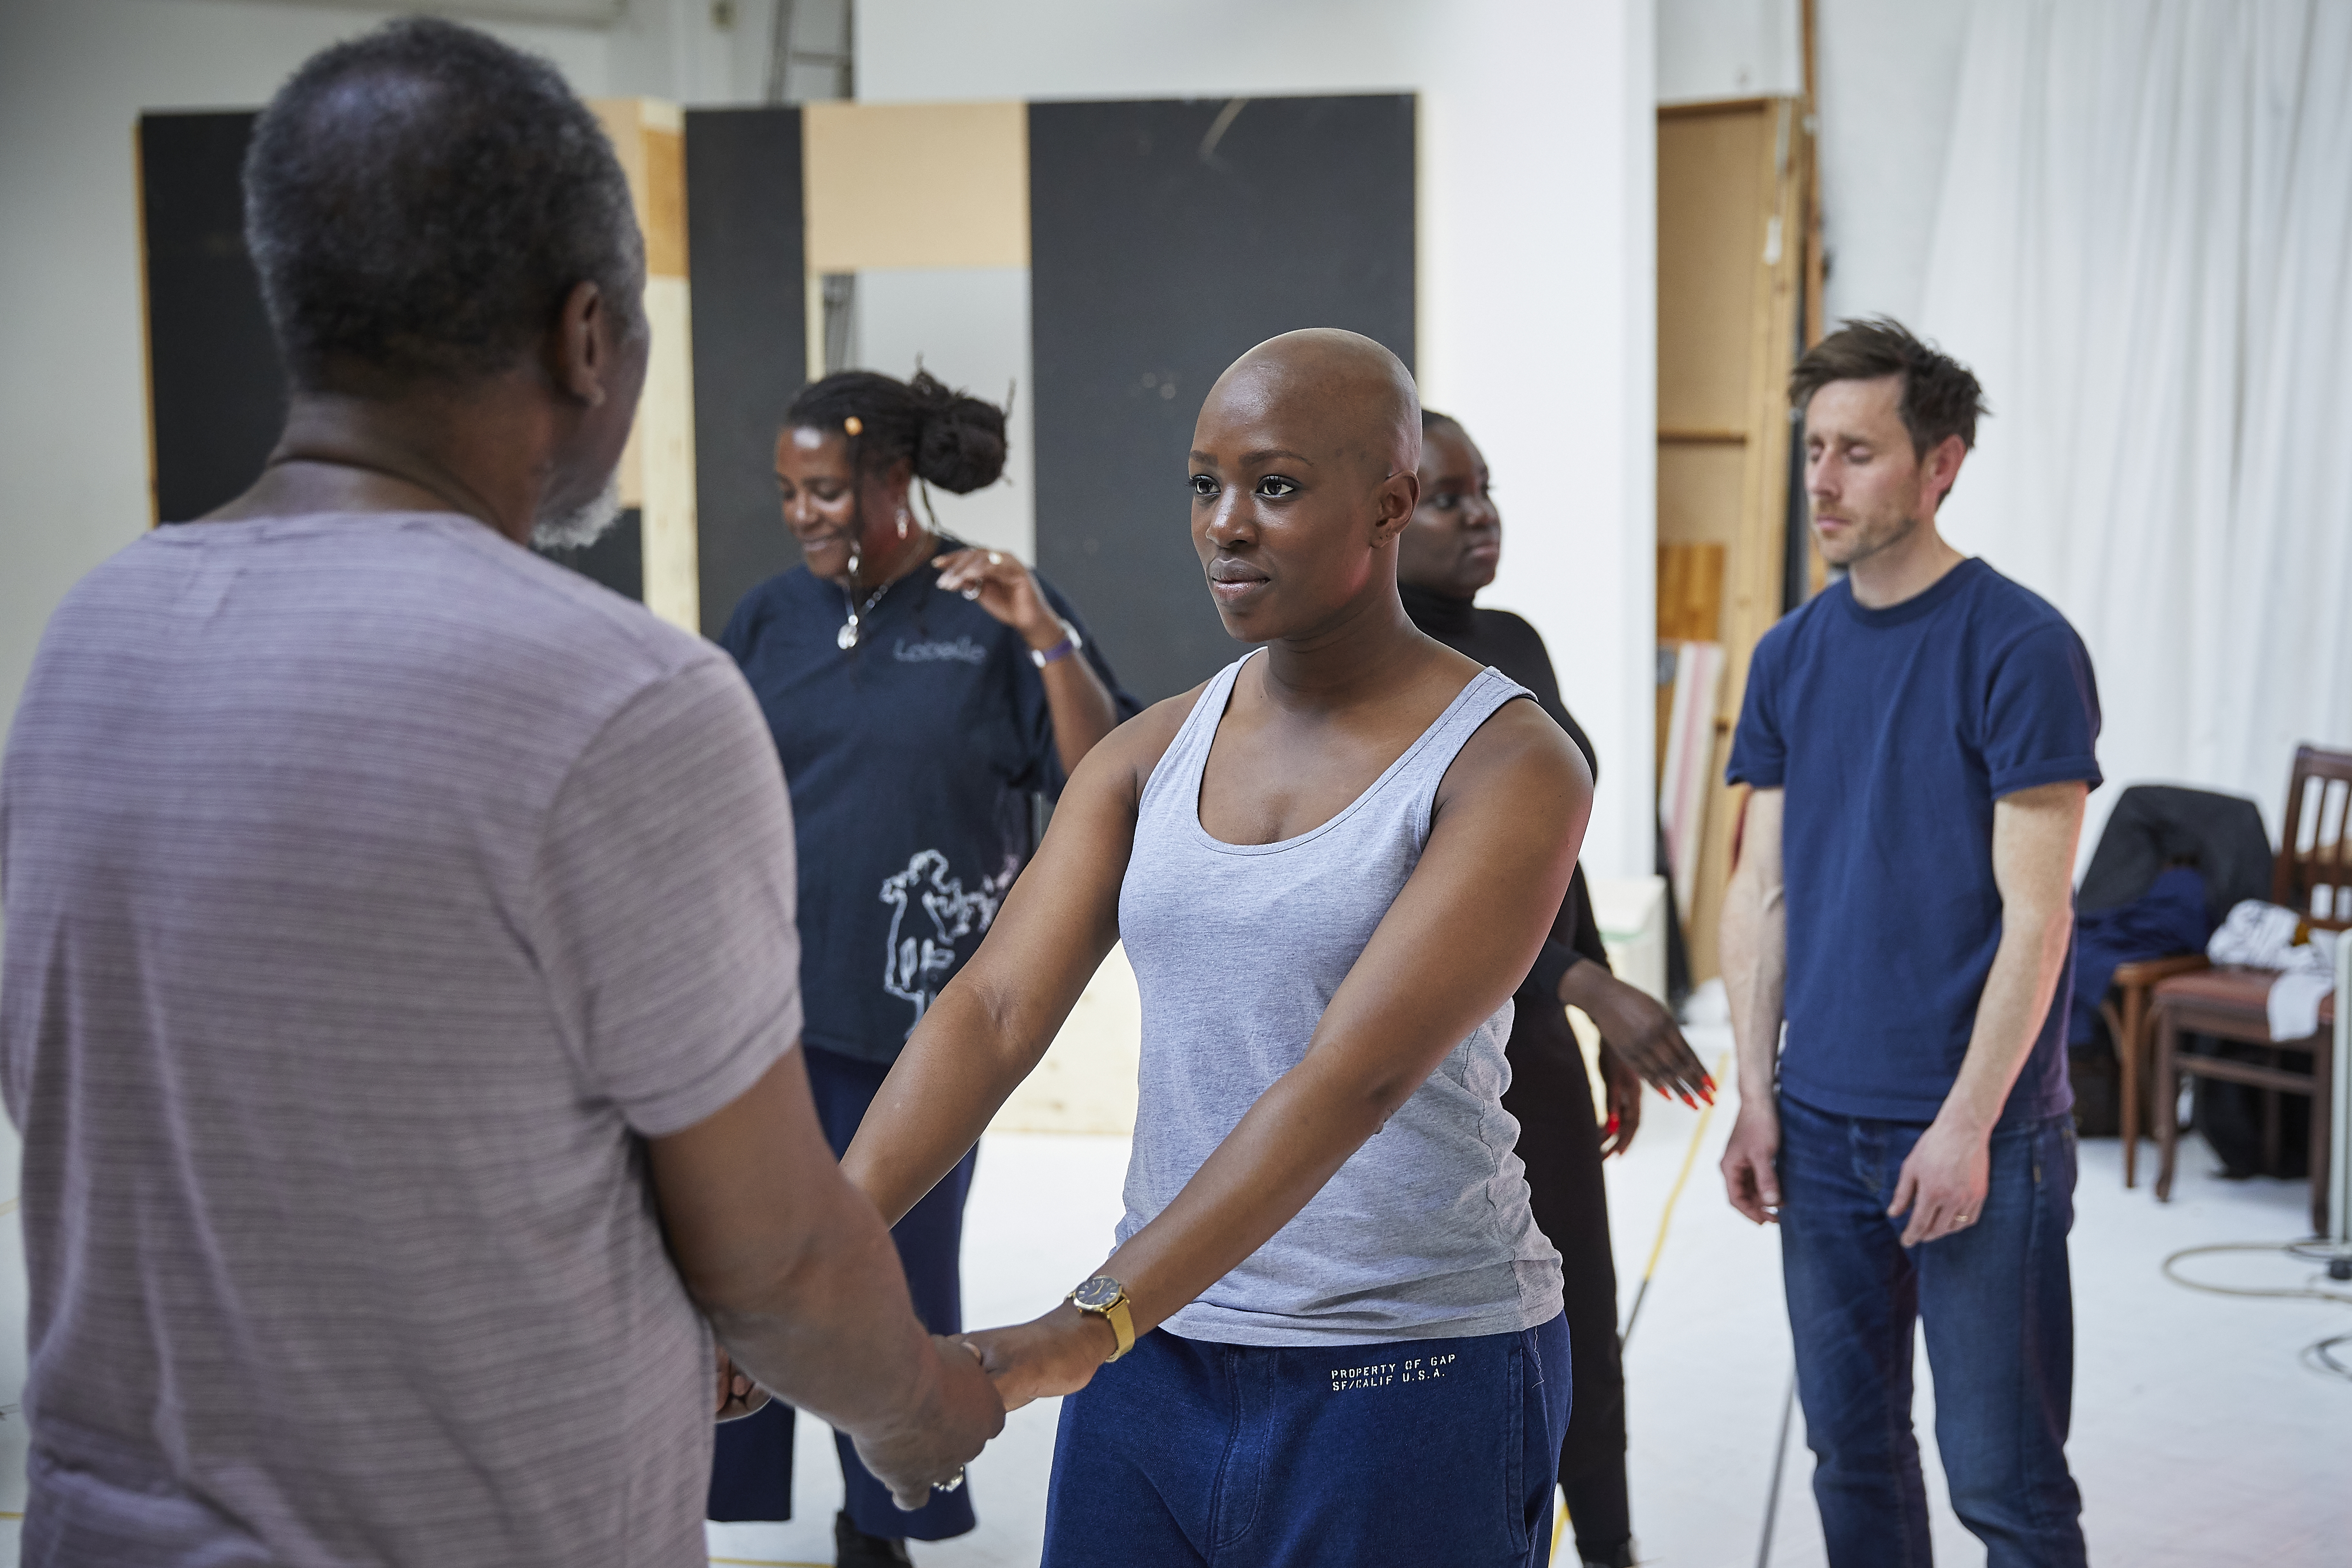 Young Vic</p>
<p>DEATH OF A SALESMAN<br />
Rehearsals